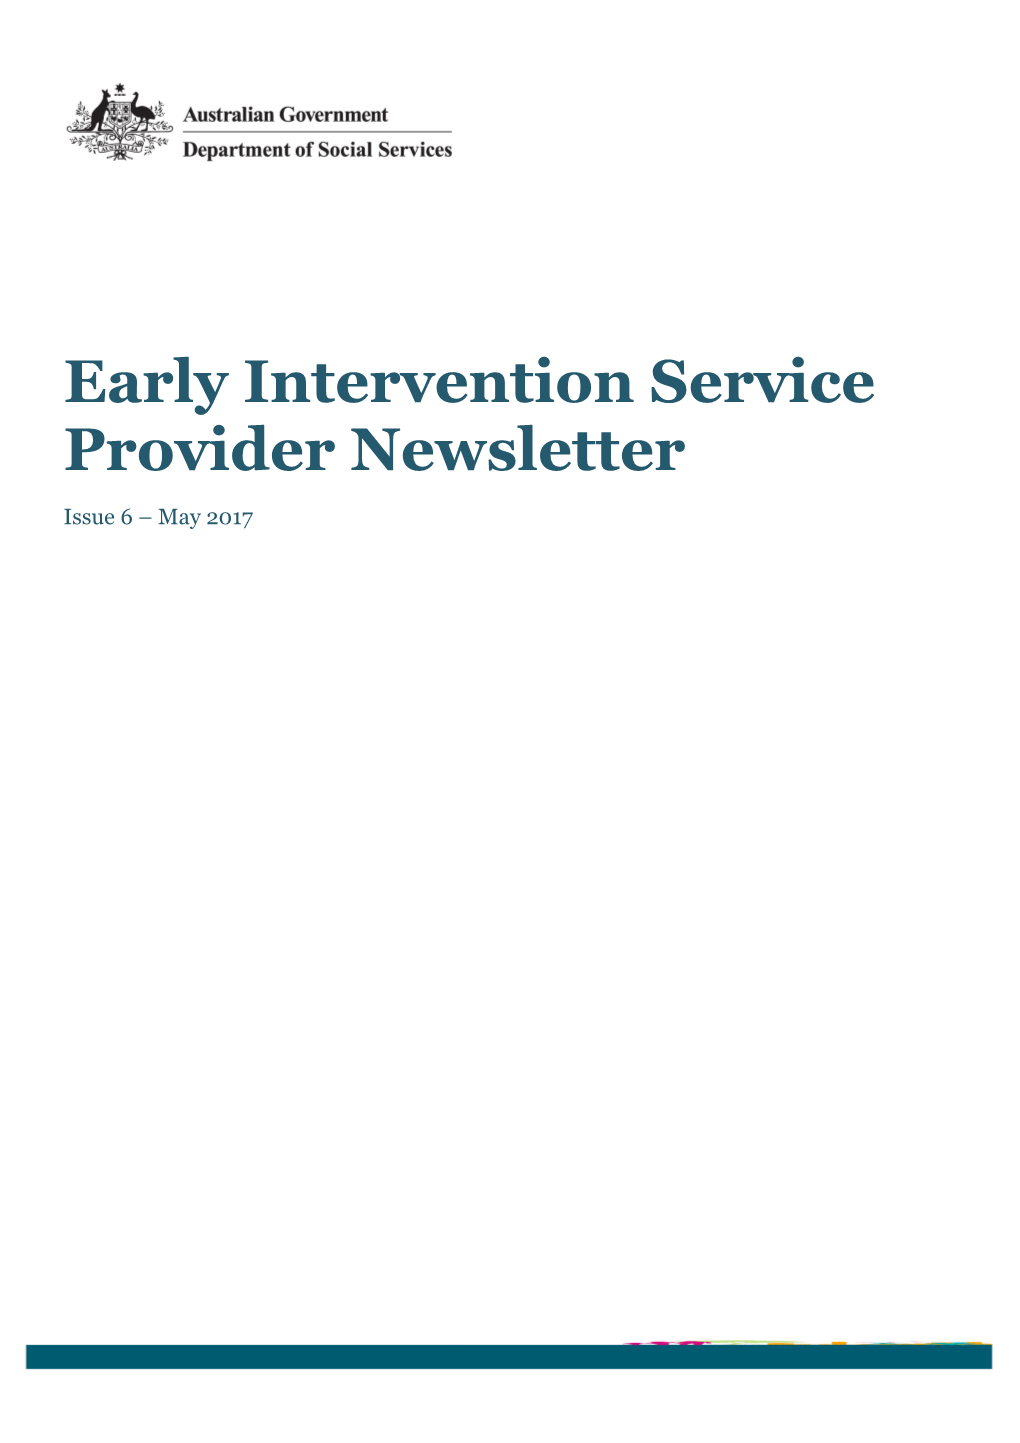 Early Intervention Service Provider Newsletter October 2015